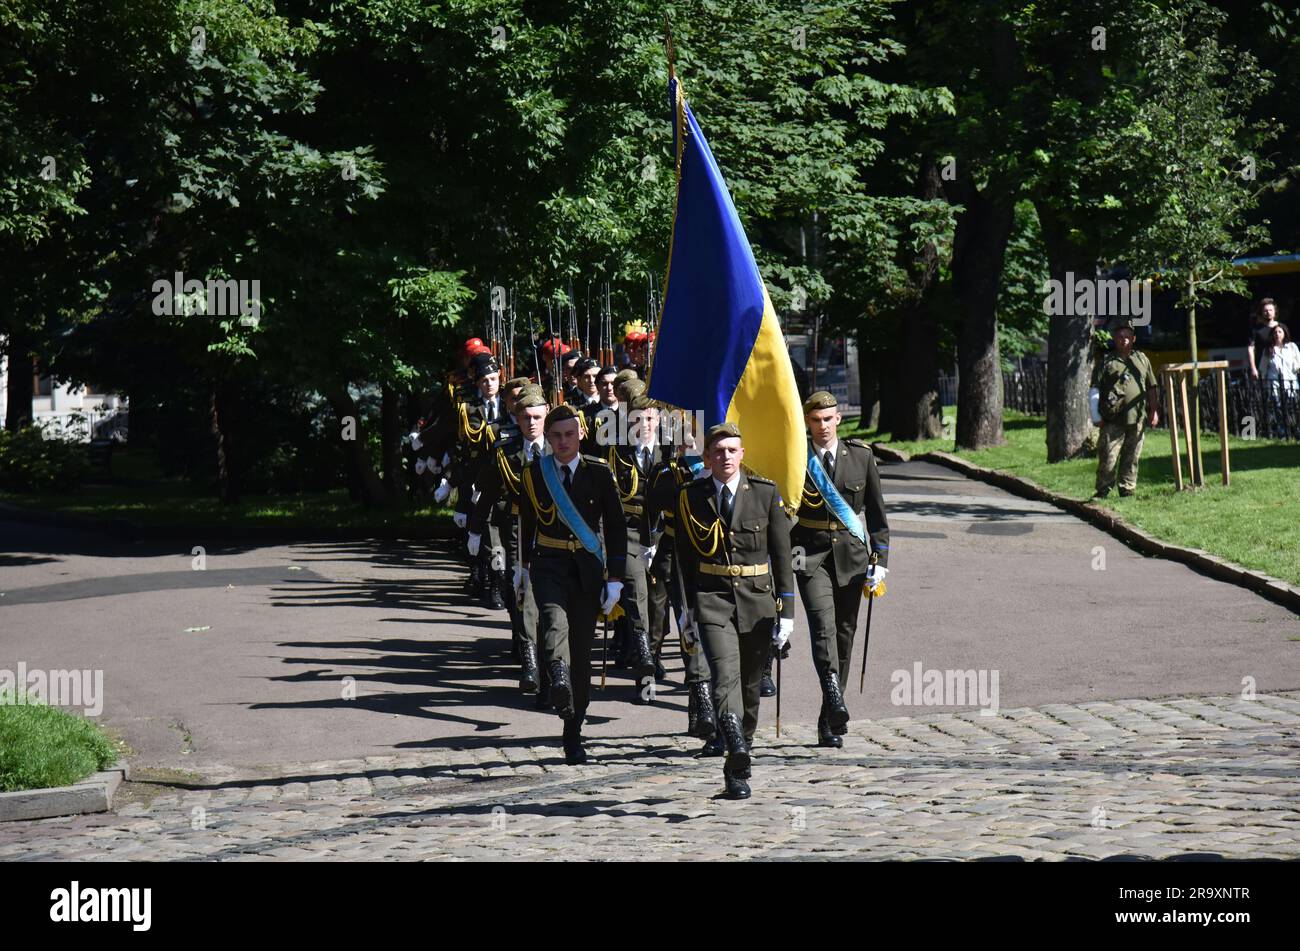 Lviv, Ukraine. 28th June, 2023. Cadets from the honor guard march during the celebration of the Constitution Day of Ukraine. Ukraine celebrated the 27th anniversary of the adoption of the country's basic law - the constitution. In the conditions of the Russian-Ukrainian war, official events were very short. In Lviv, the Ukrainian flag was raised, honor guard marched, and a military band performed. Credit: SOPA Images Limited/Alamy Live News Stock Photo